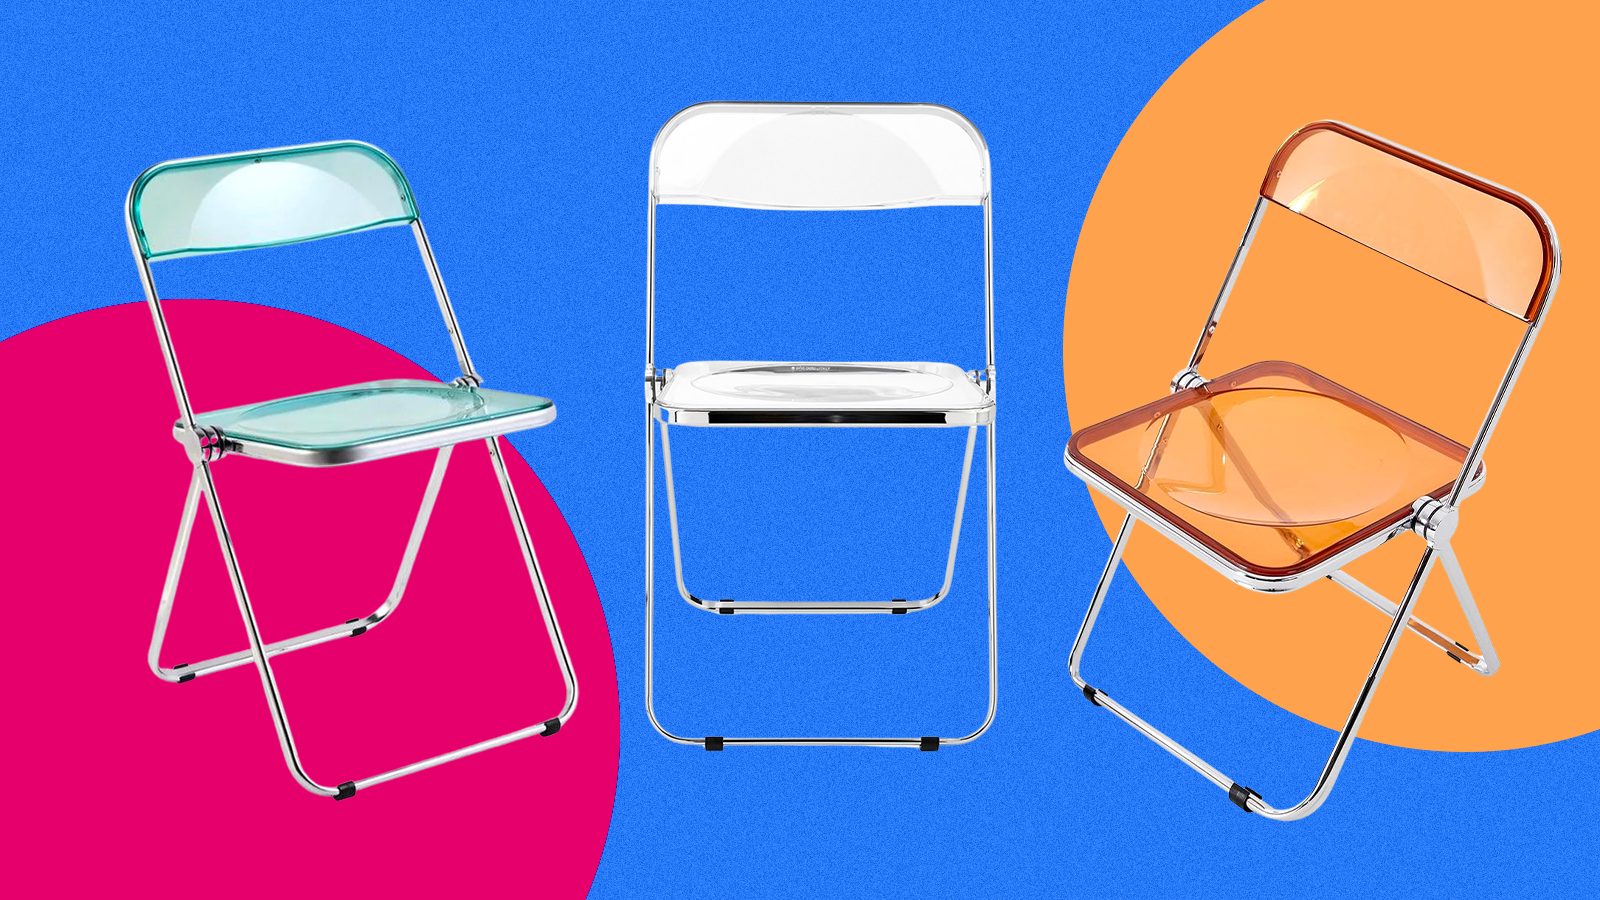 The Plia chair in blue, clear, and orange. 